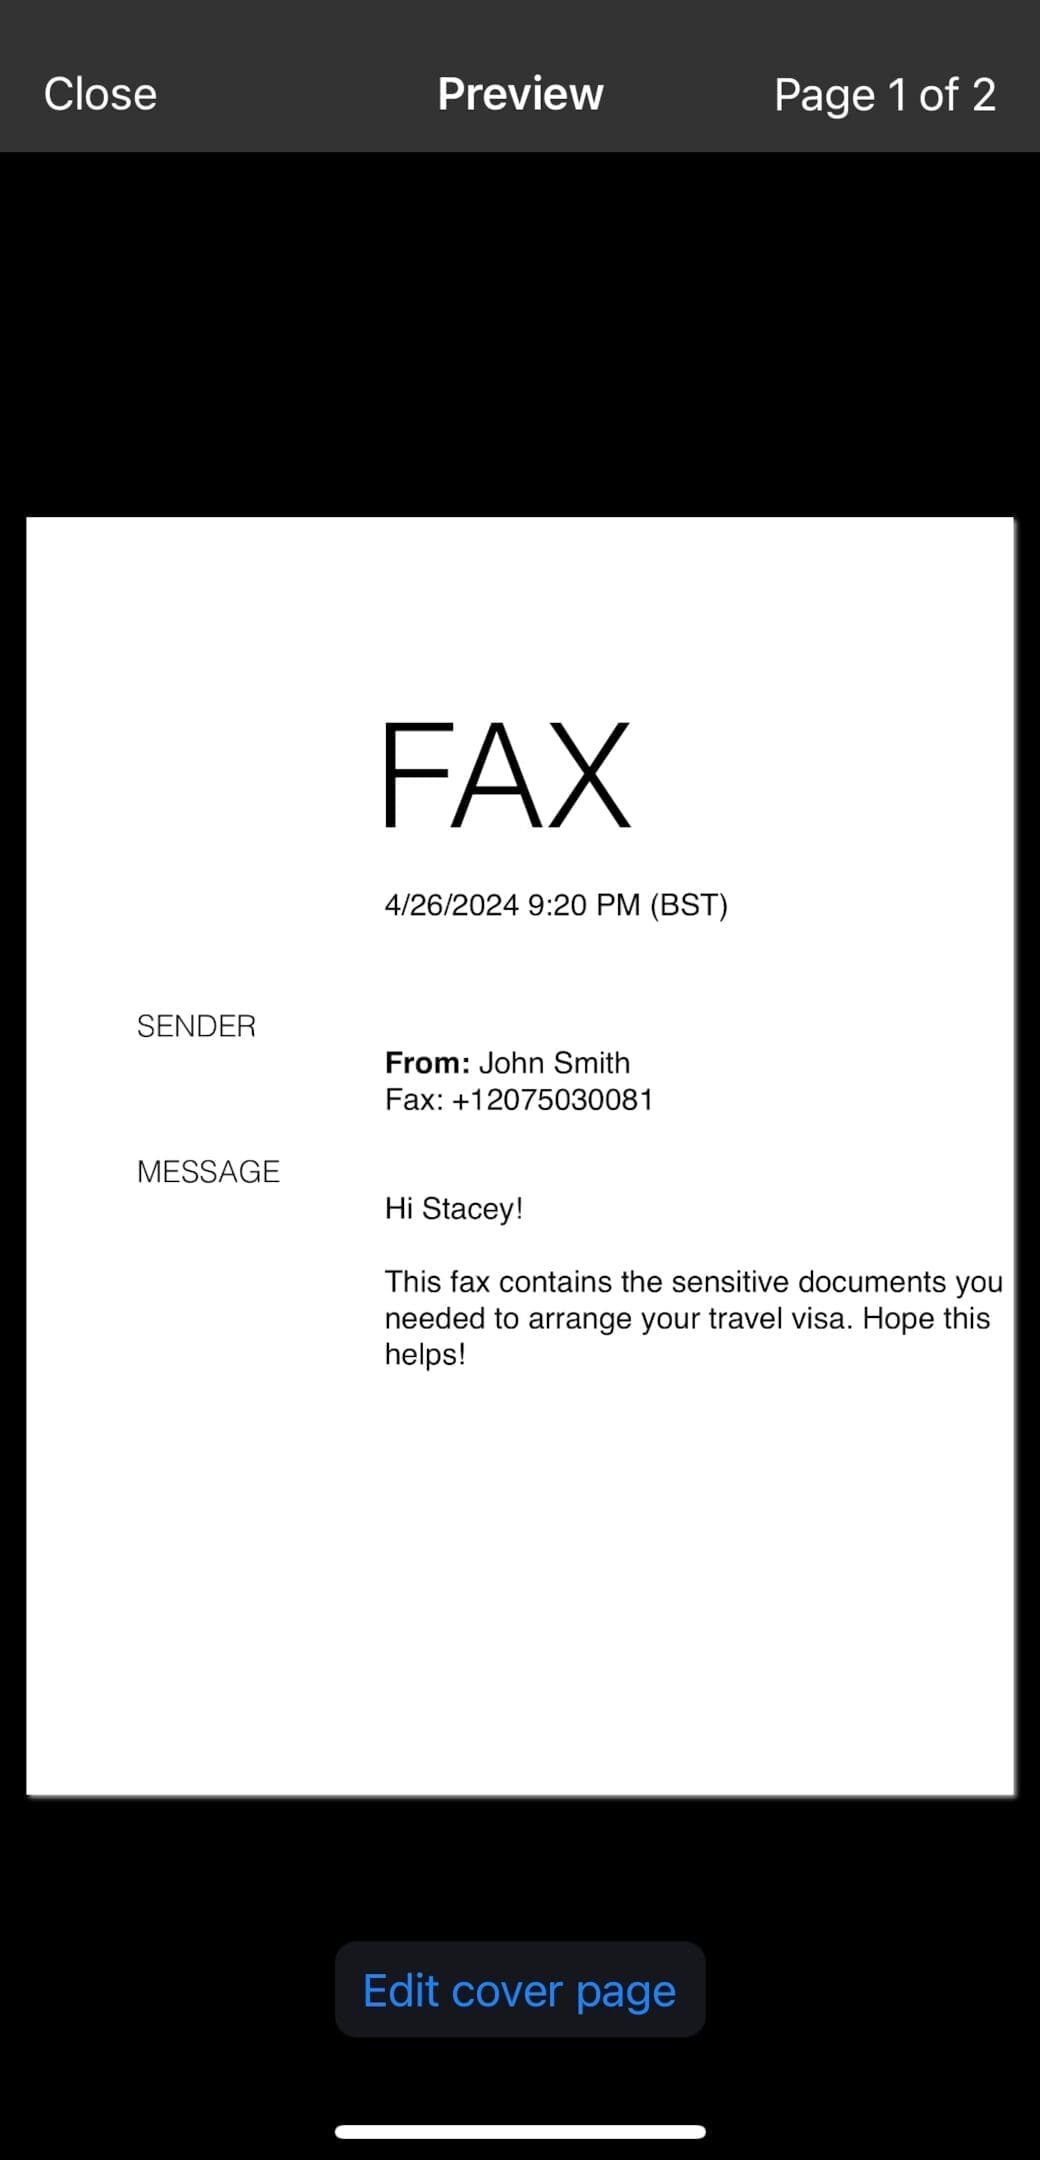 Preview cover page on the Fax App